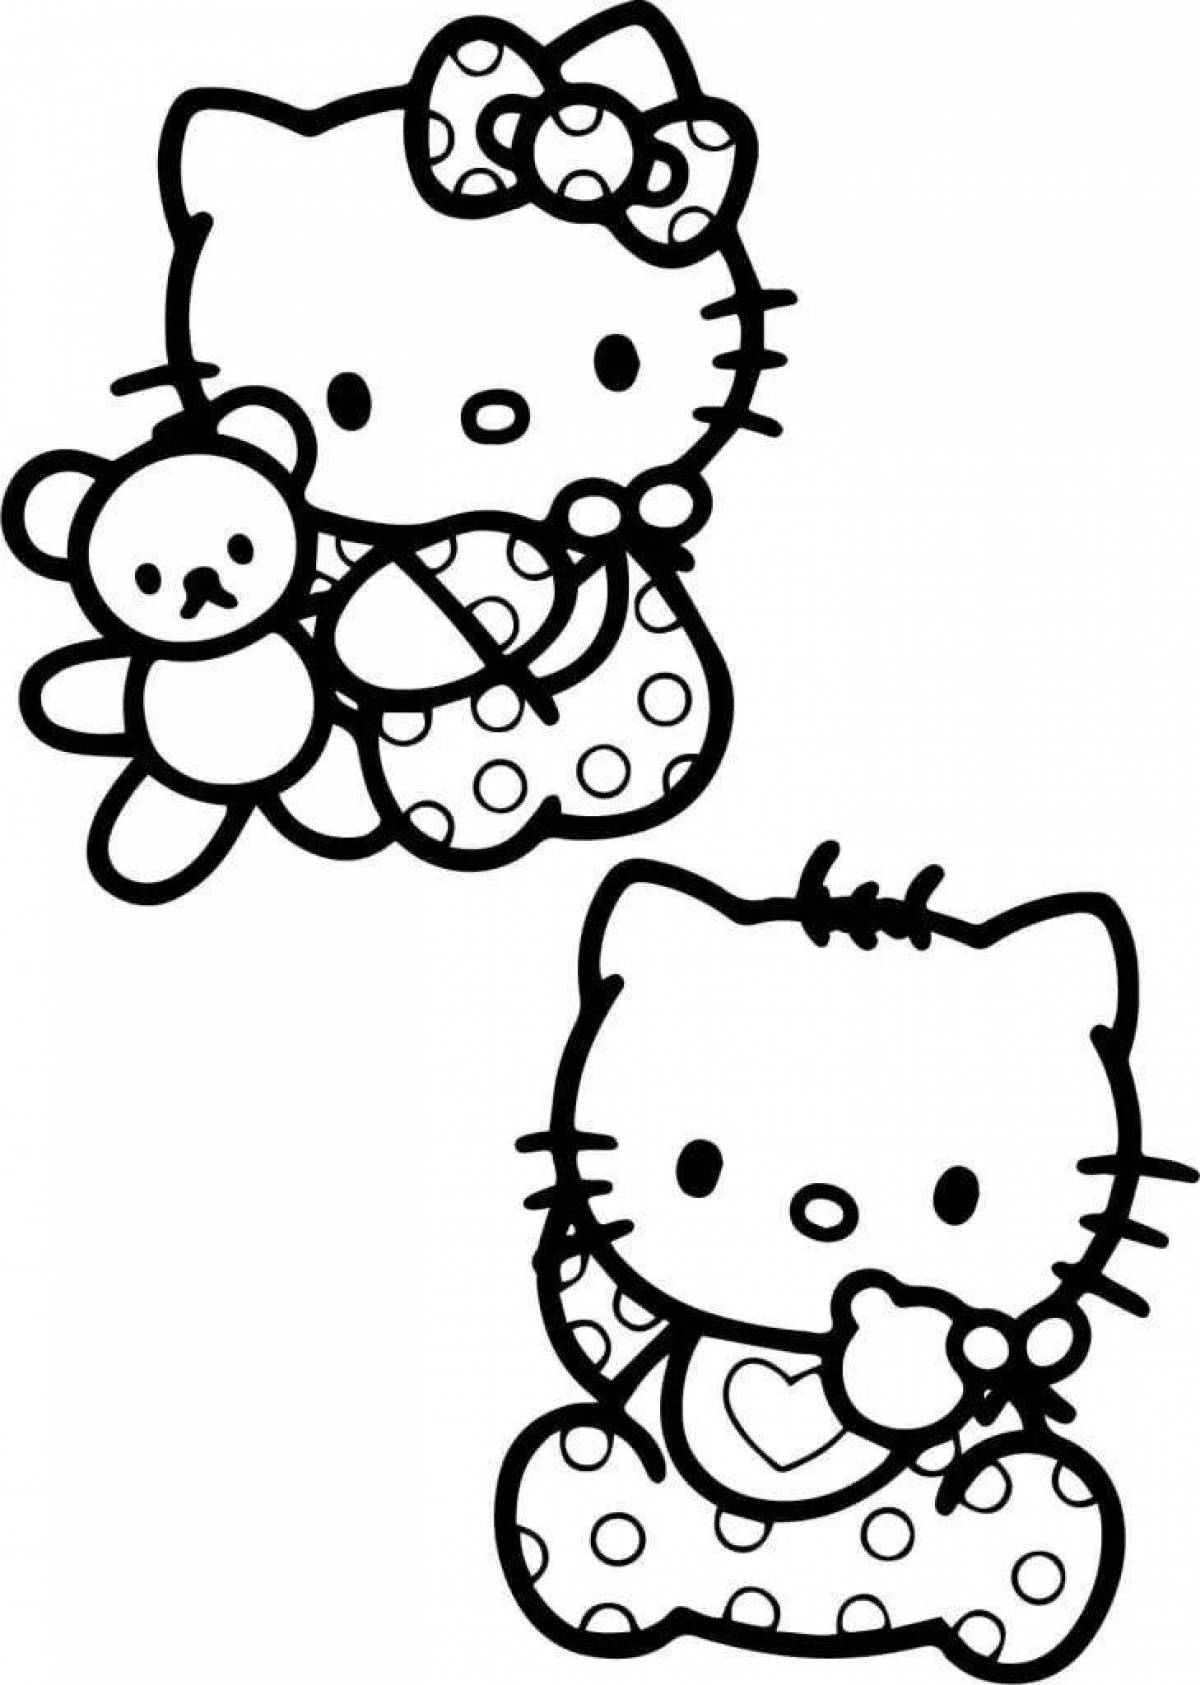 With hello kitty small #3